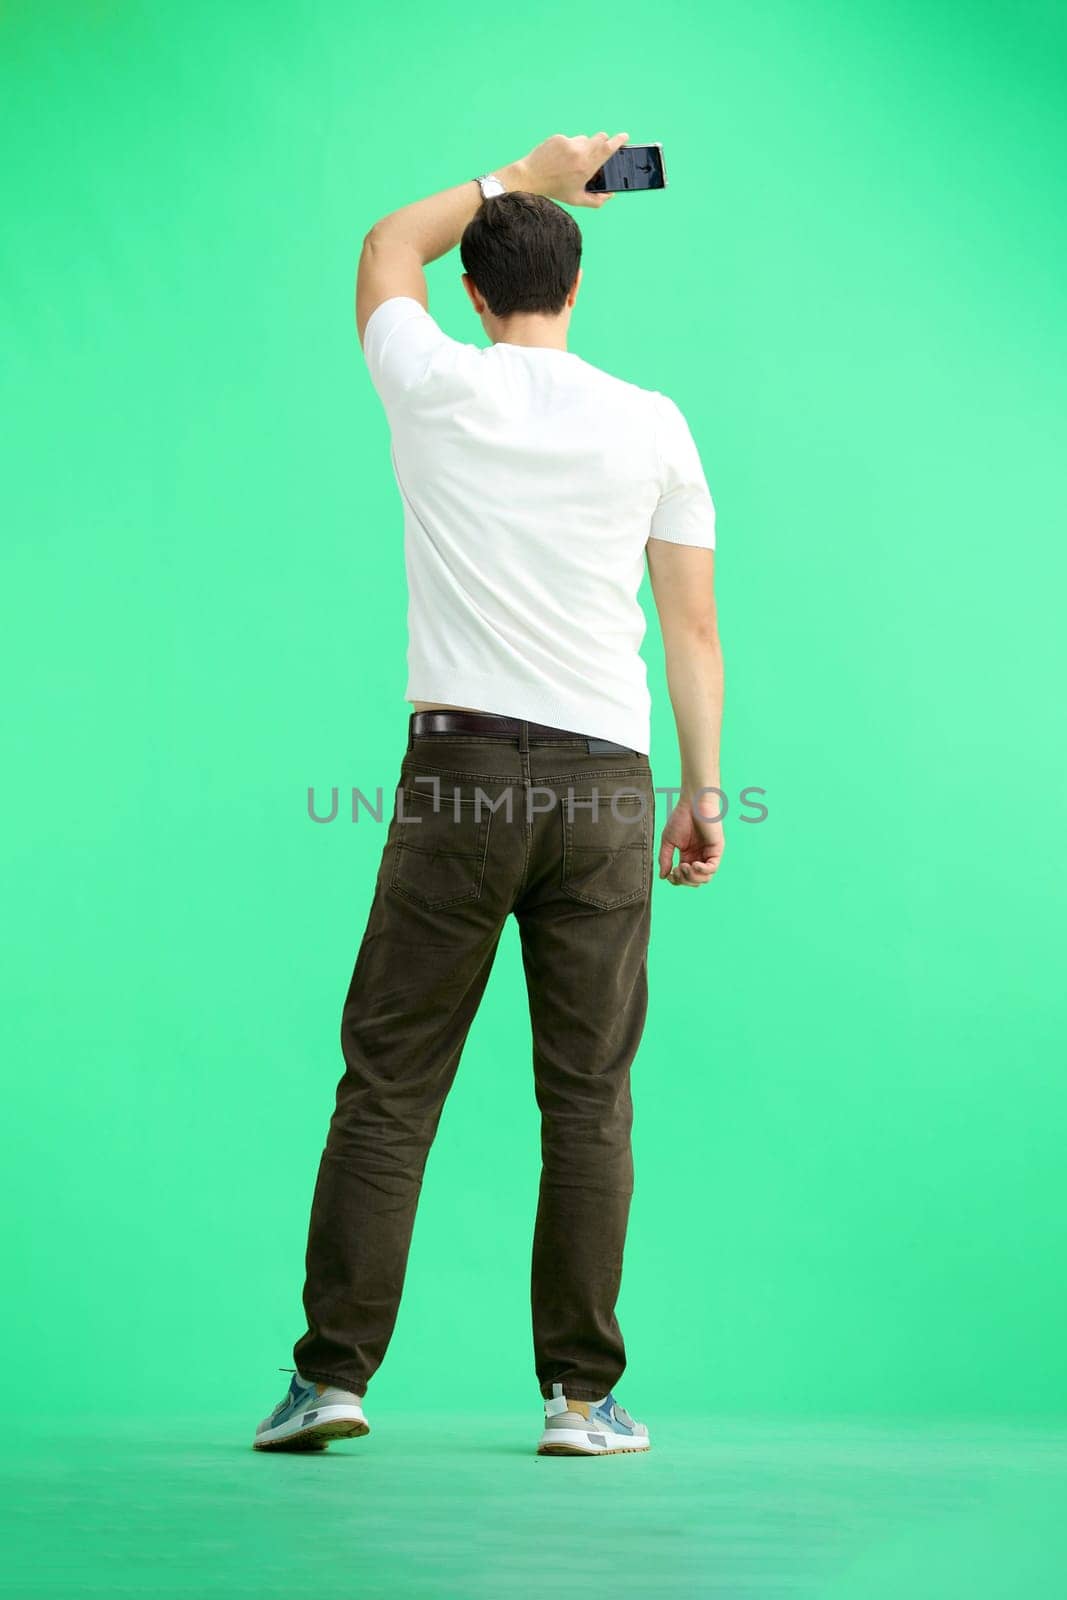 A man in full height, on a green background, waving his phone.